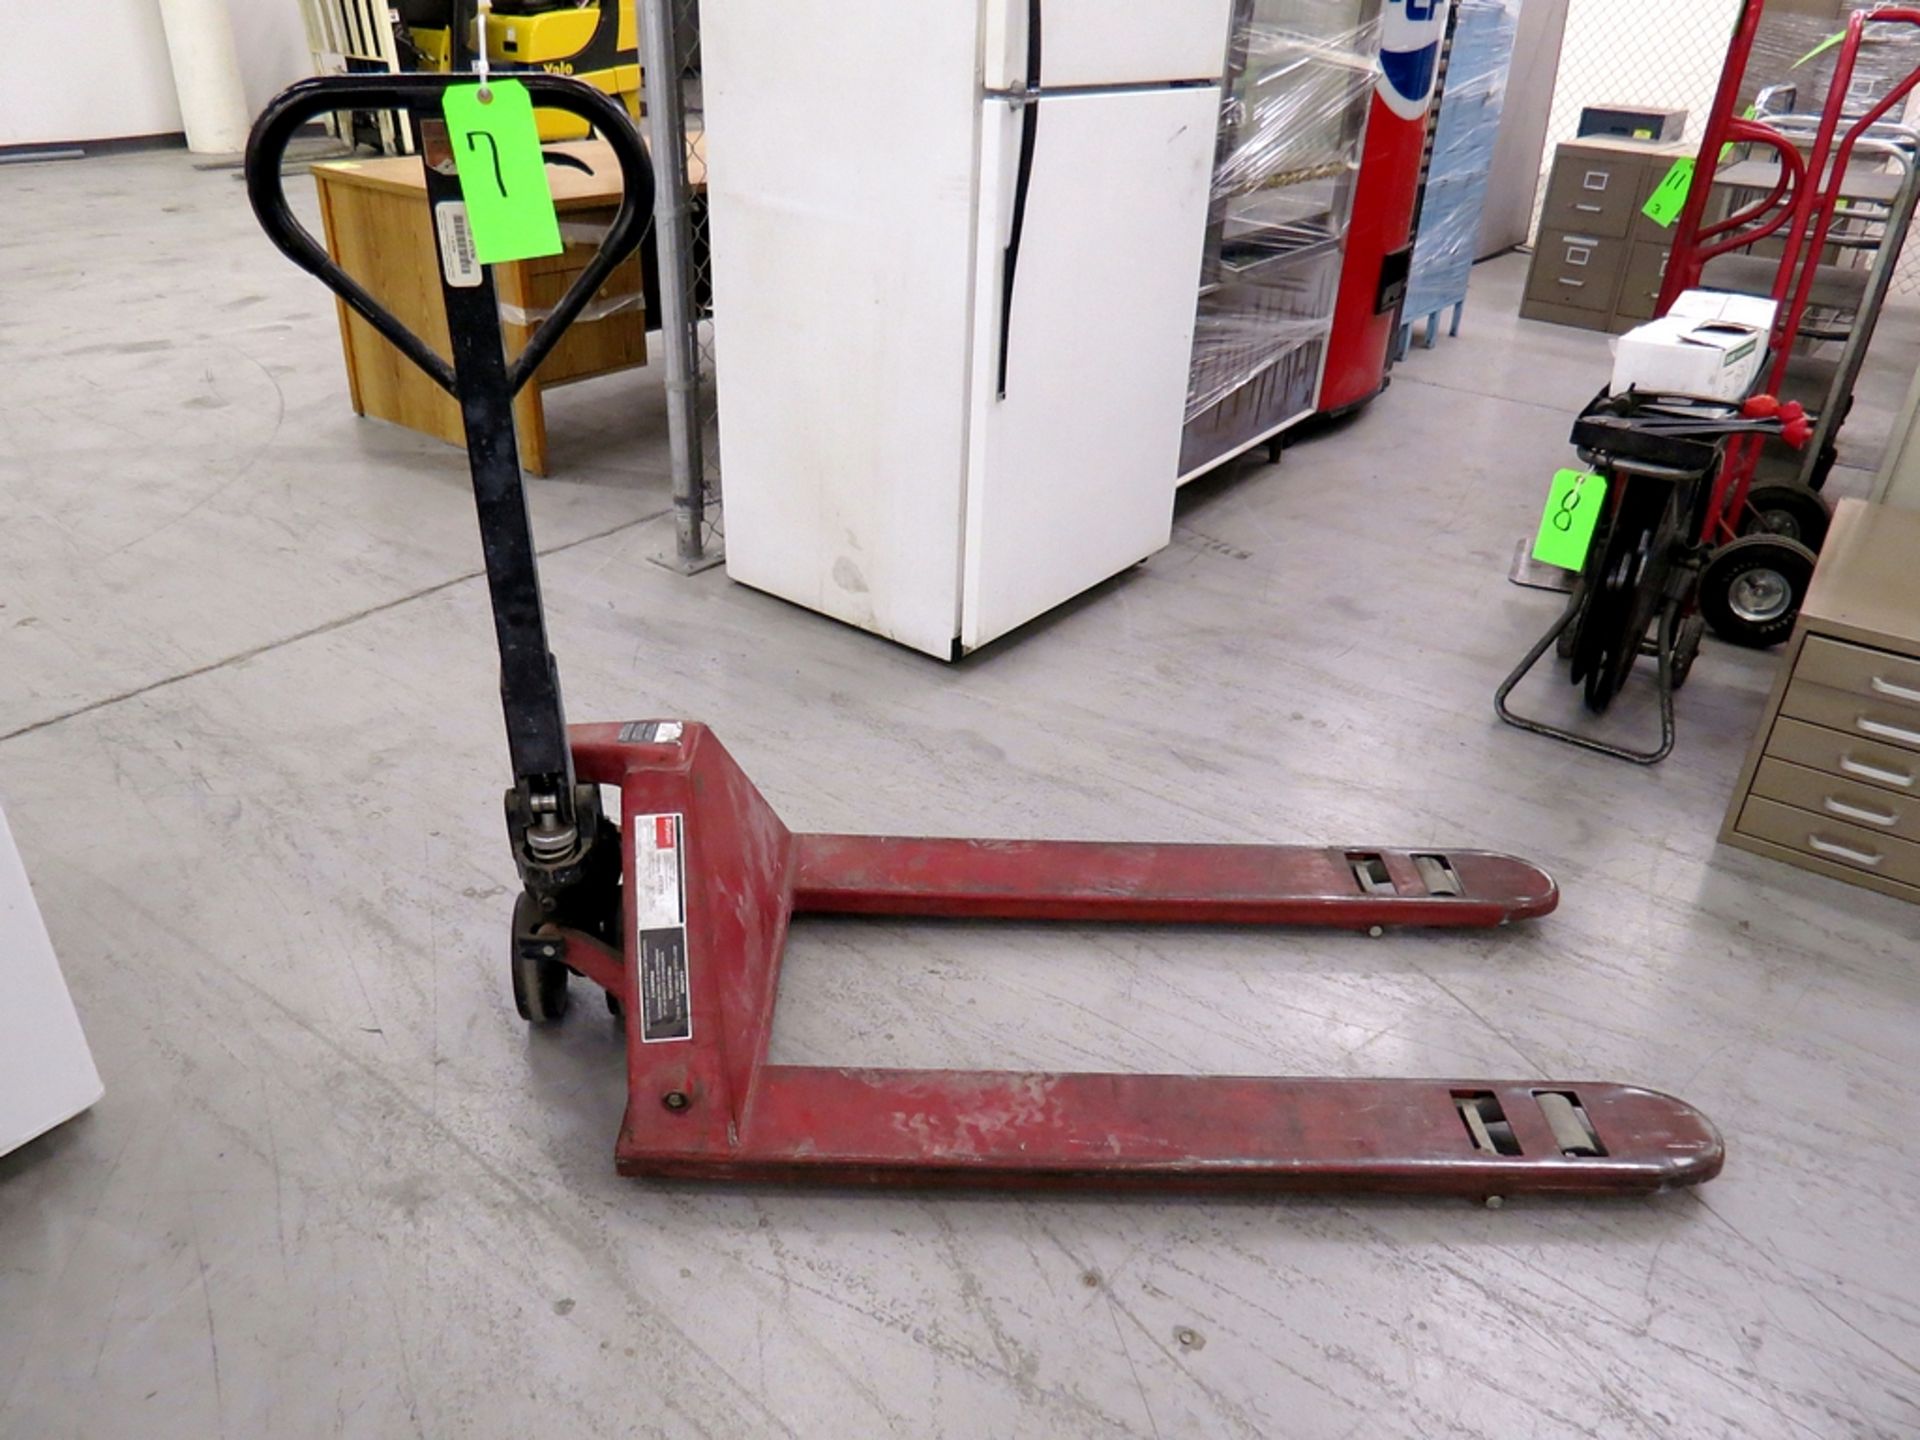 Dayton pallet jack (subject to delivery date)